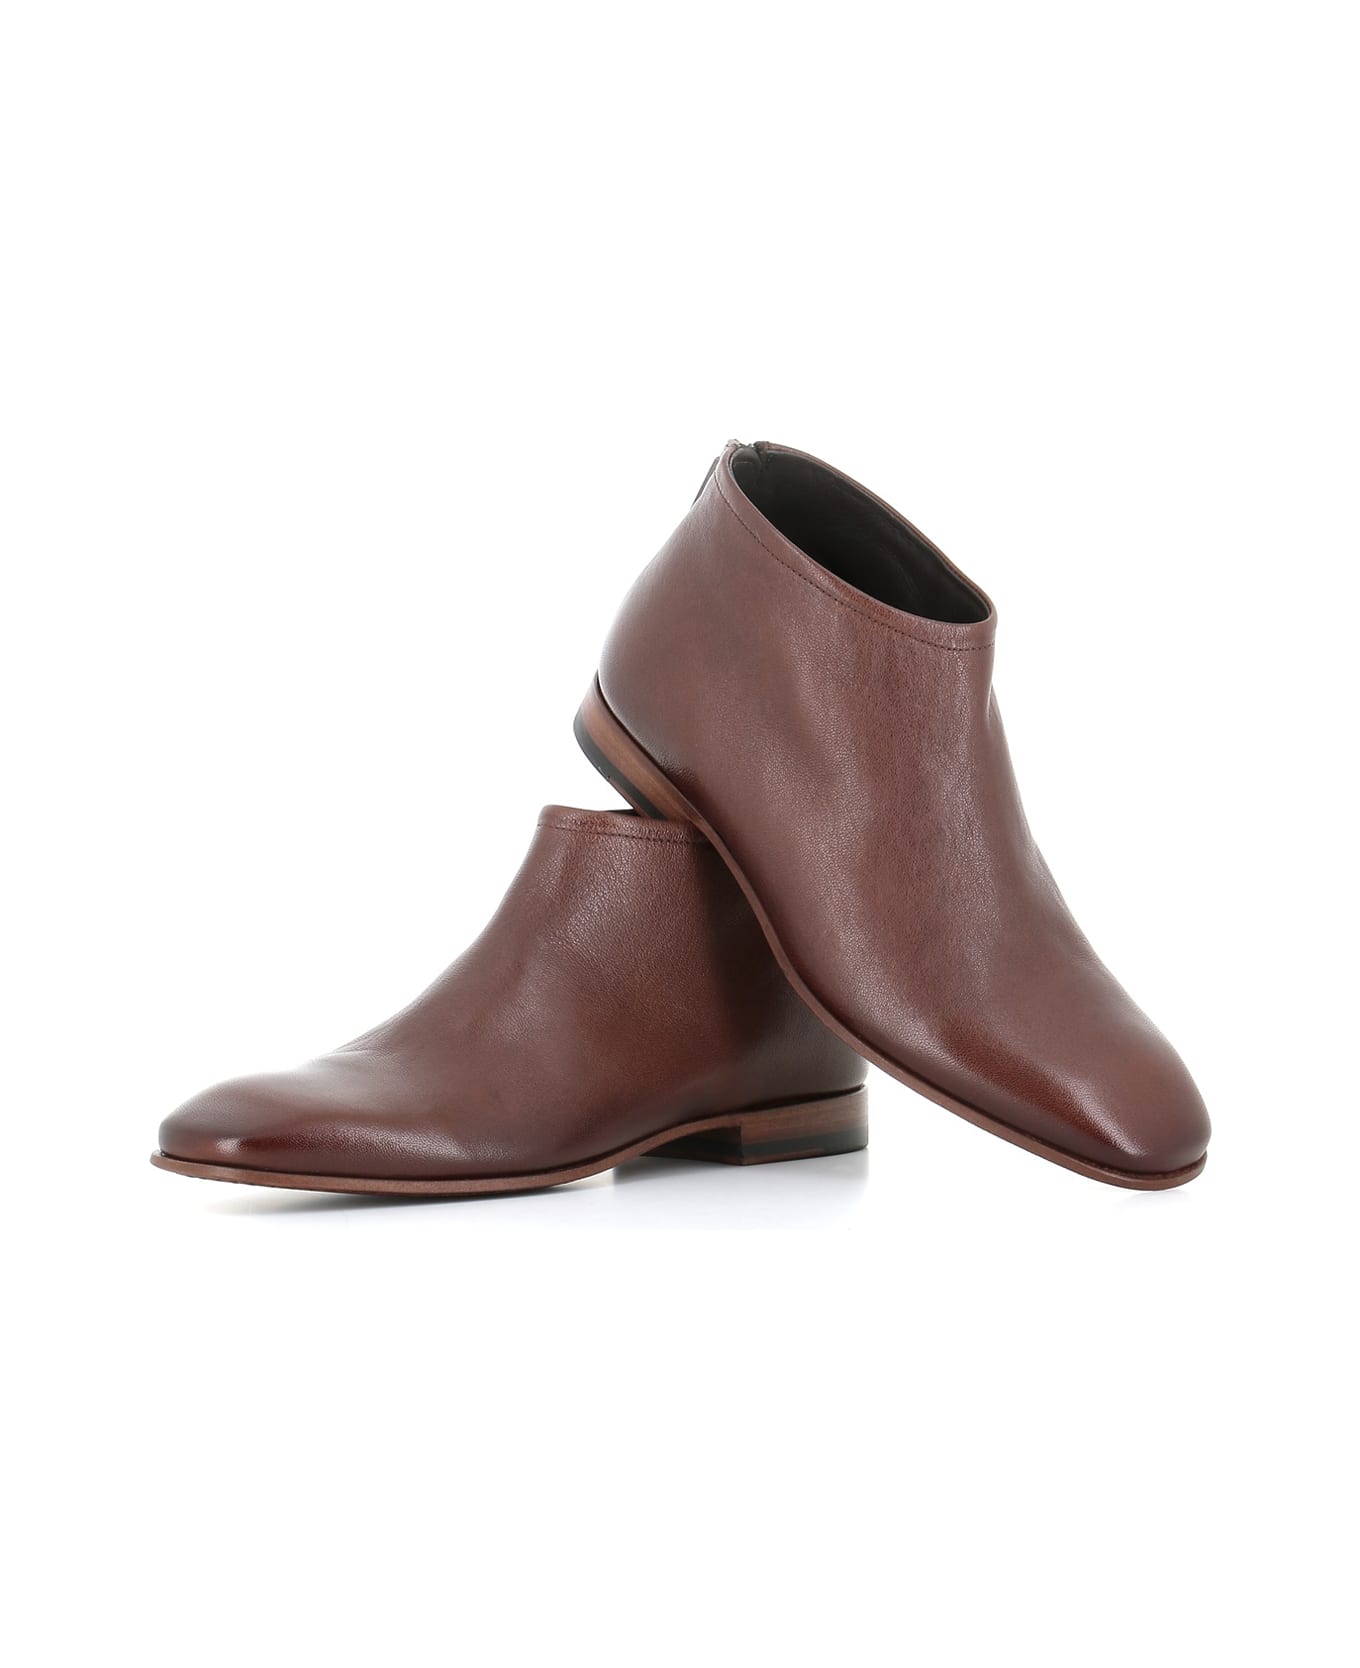 Pantanetti Ankle Boot 17120d - Brown